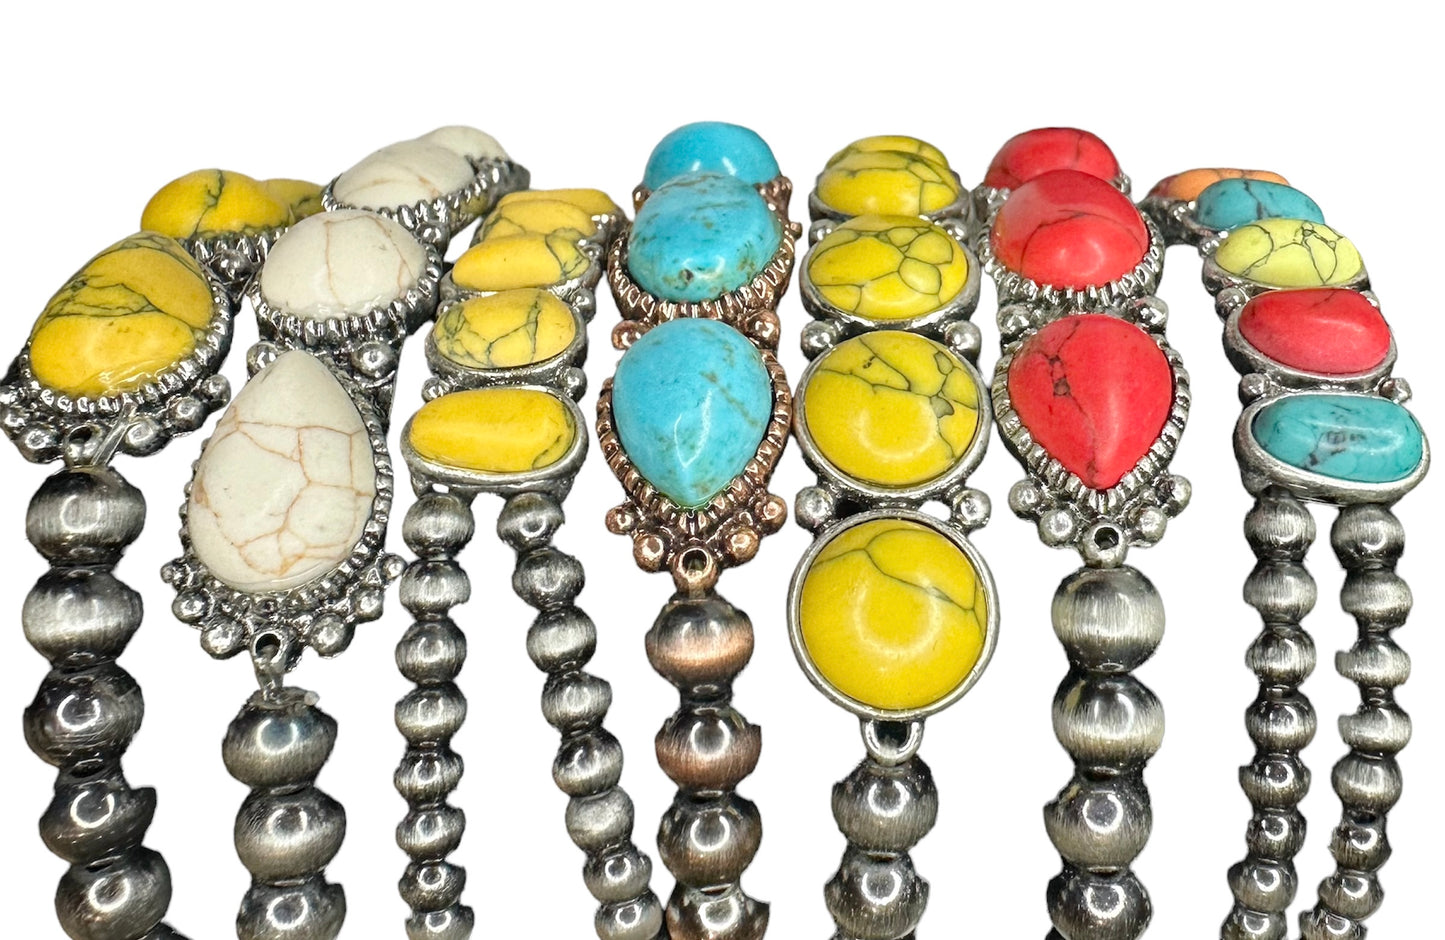 Silver Navajo Beaded Bracelet with Stone - Several Colors available